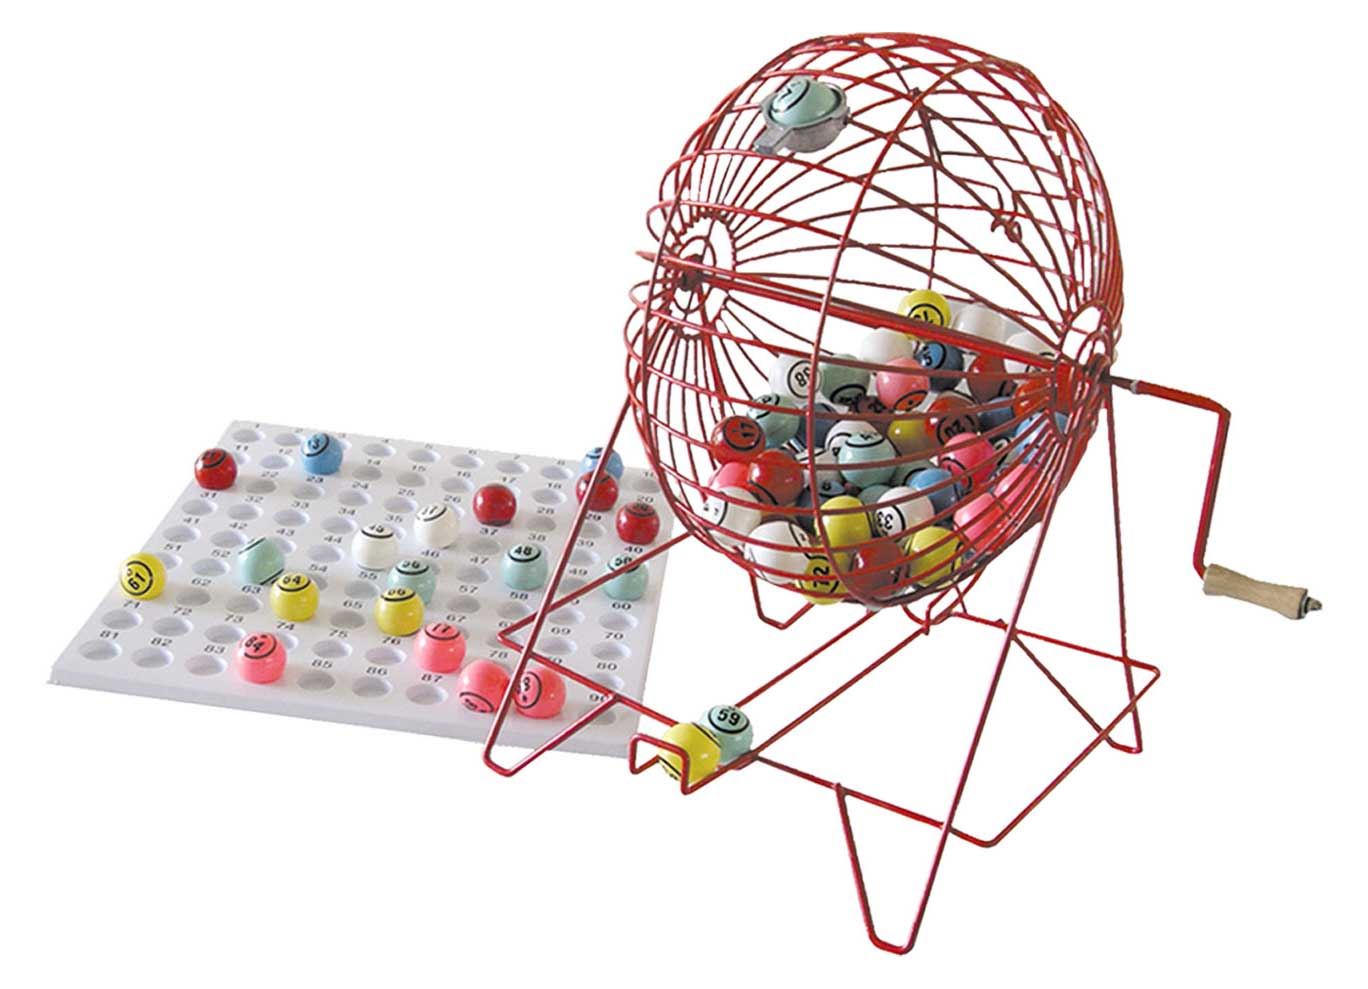 Large Bingo Cage with 38mm Balls & Checkboard